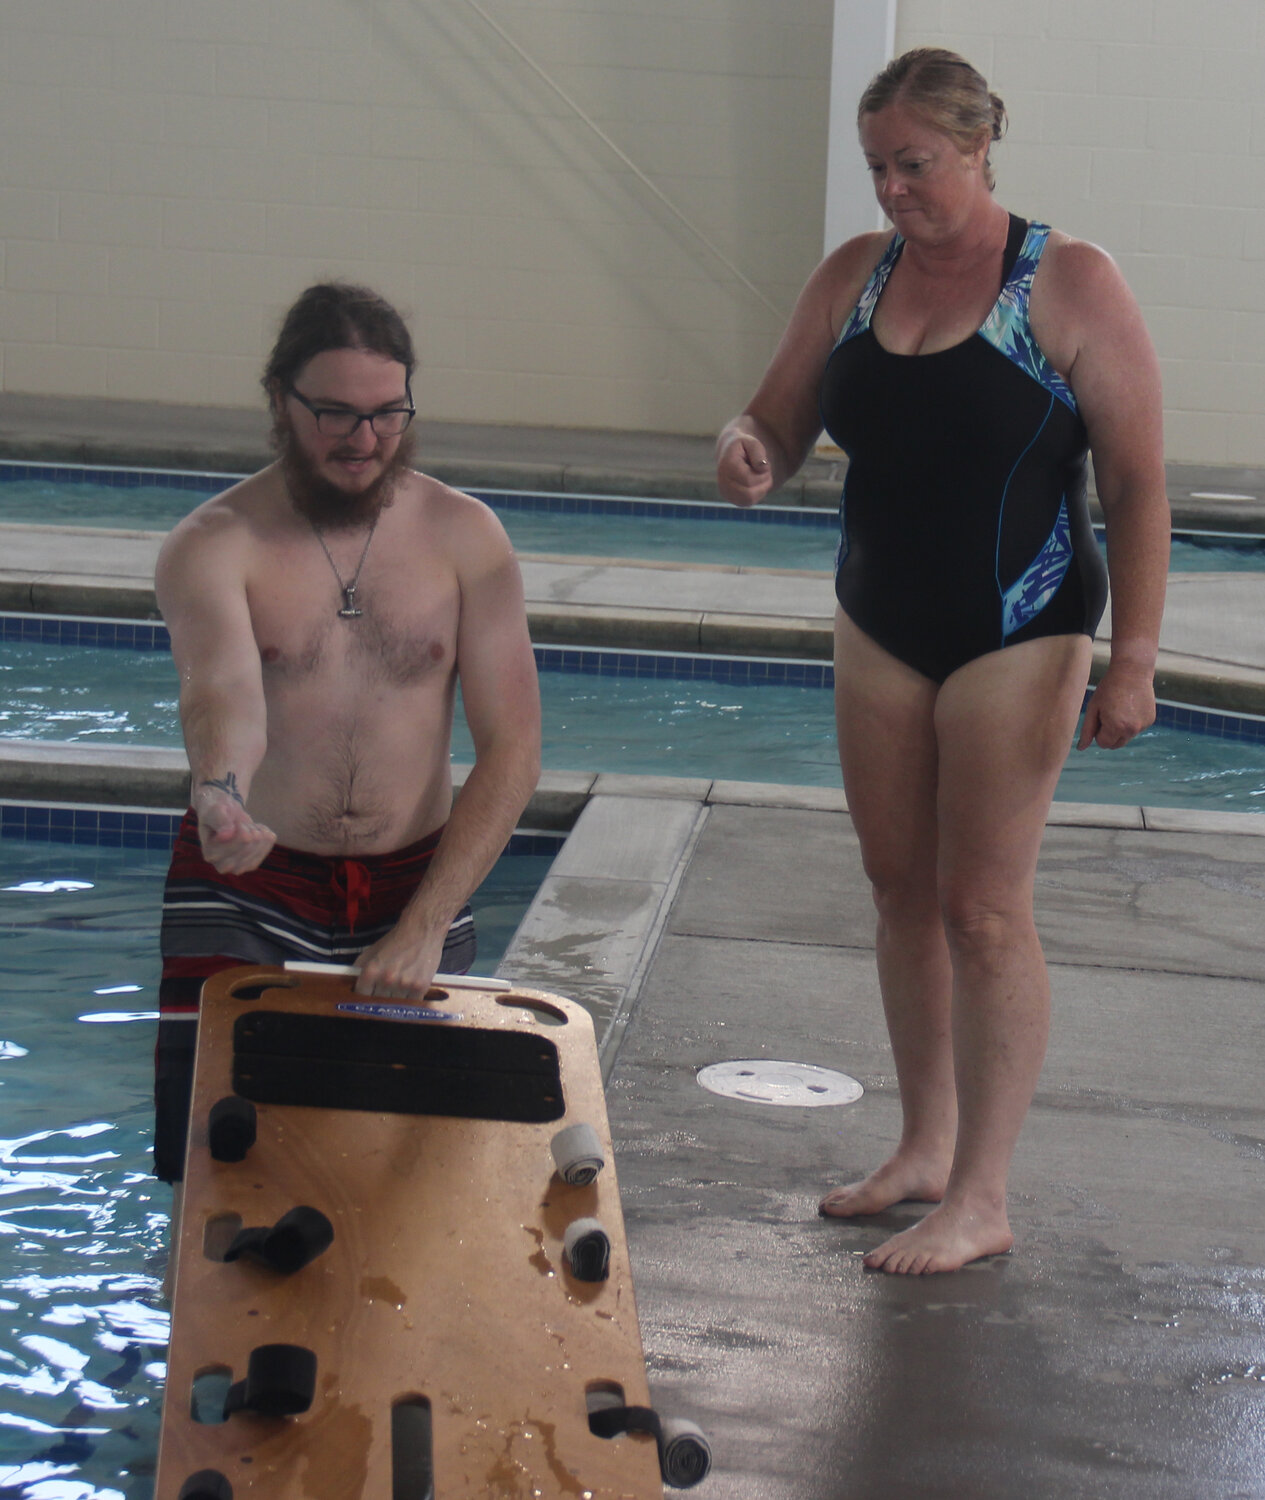 Cole McBride works with lifeguard candidate Tamara Wurth on backboard technique.